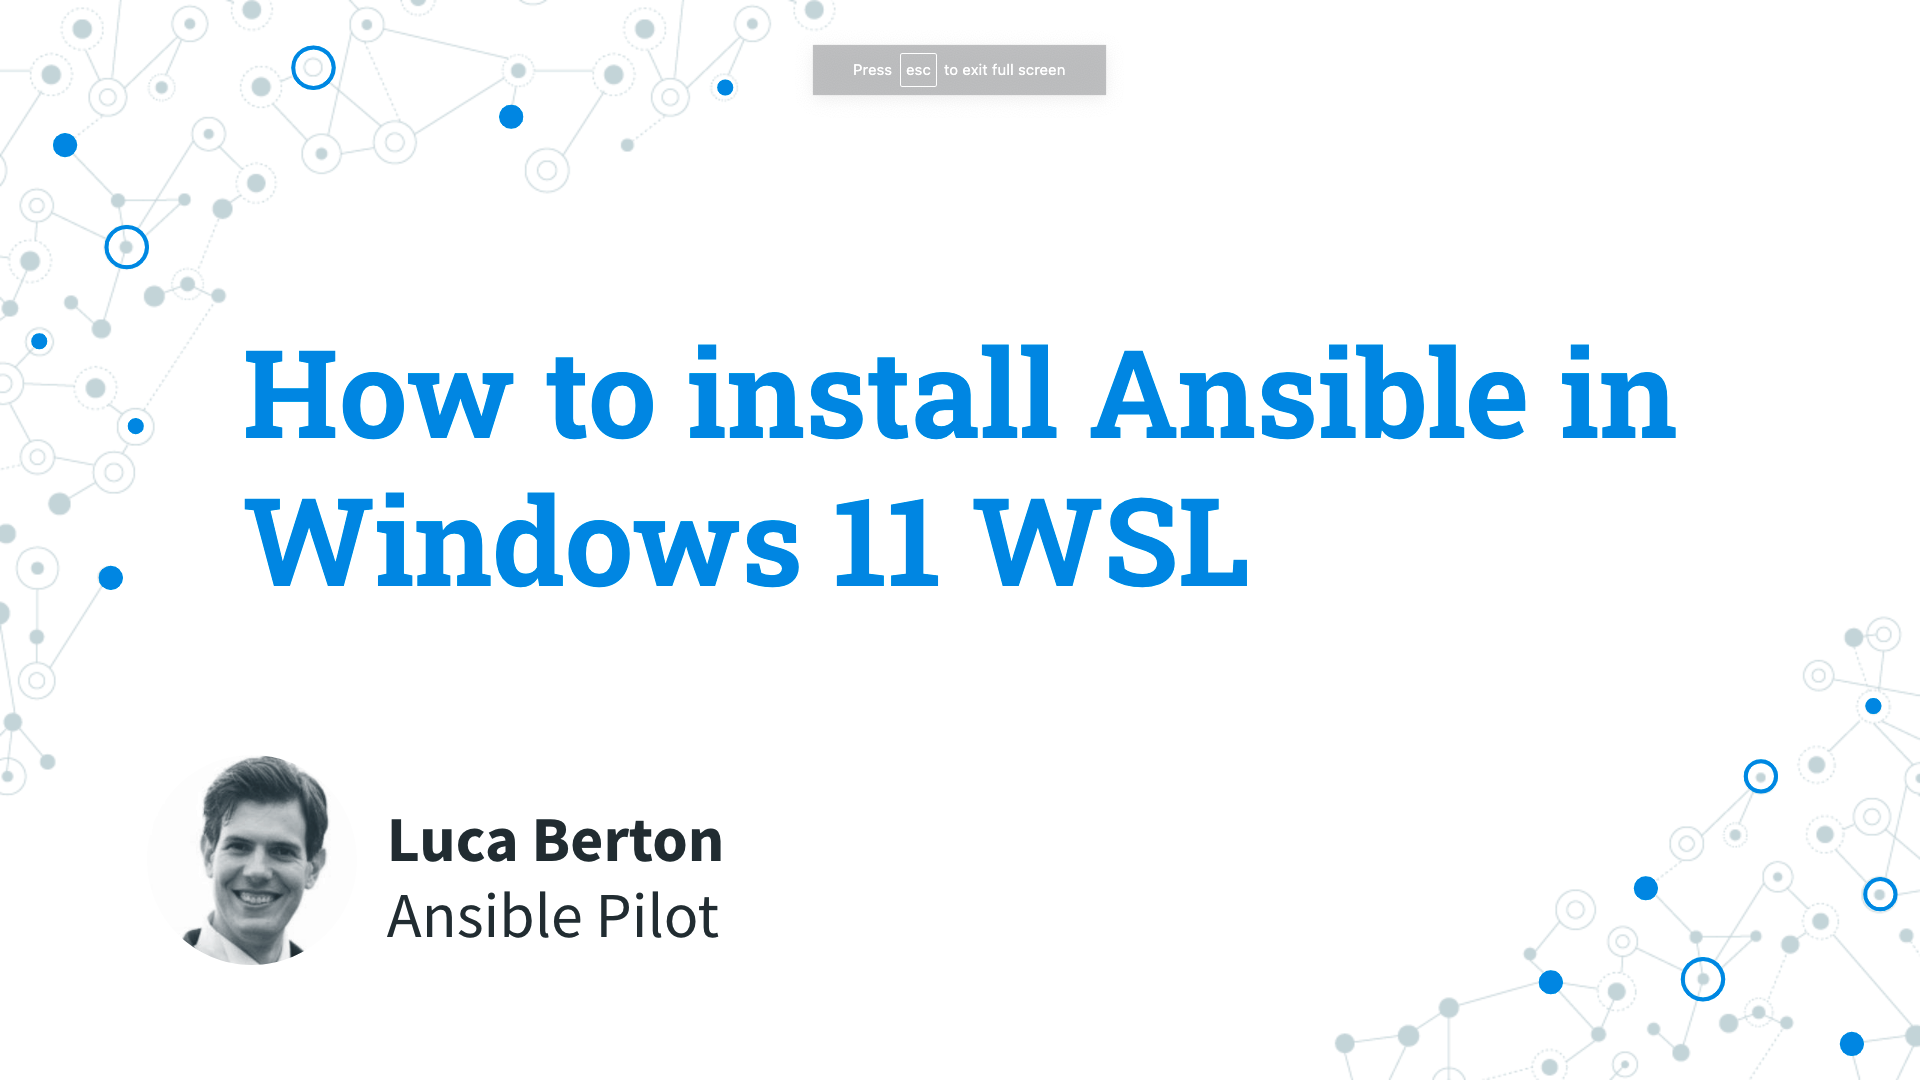 How to install Ansible in Windows 11 WSL Windows Subsystem for Linux - Ansible install